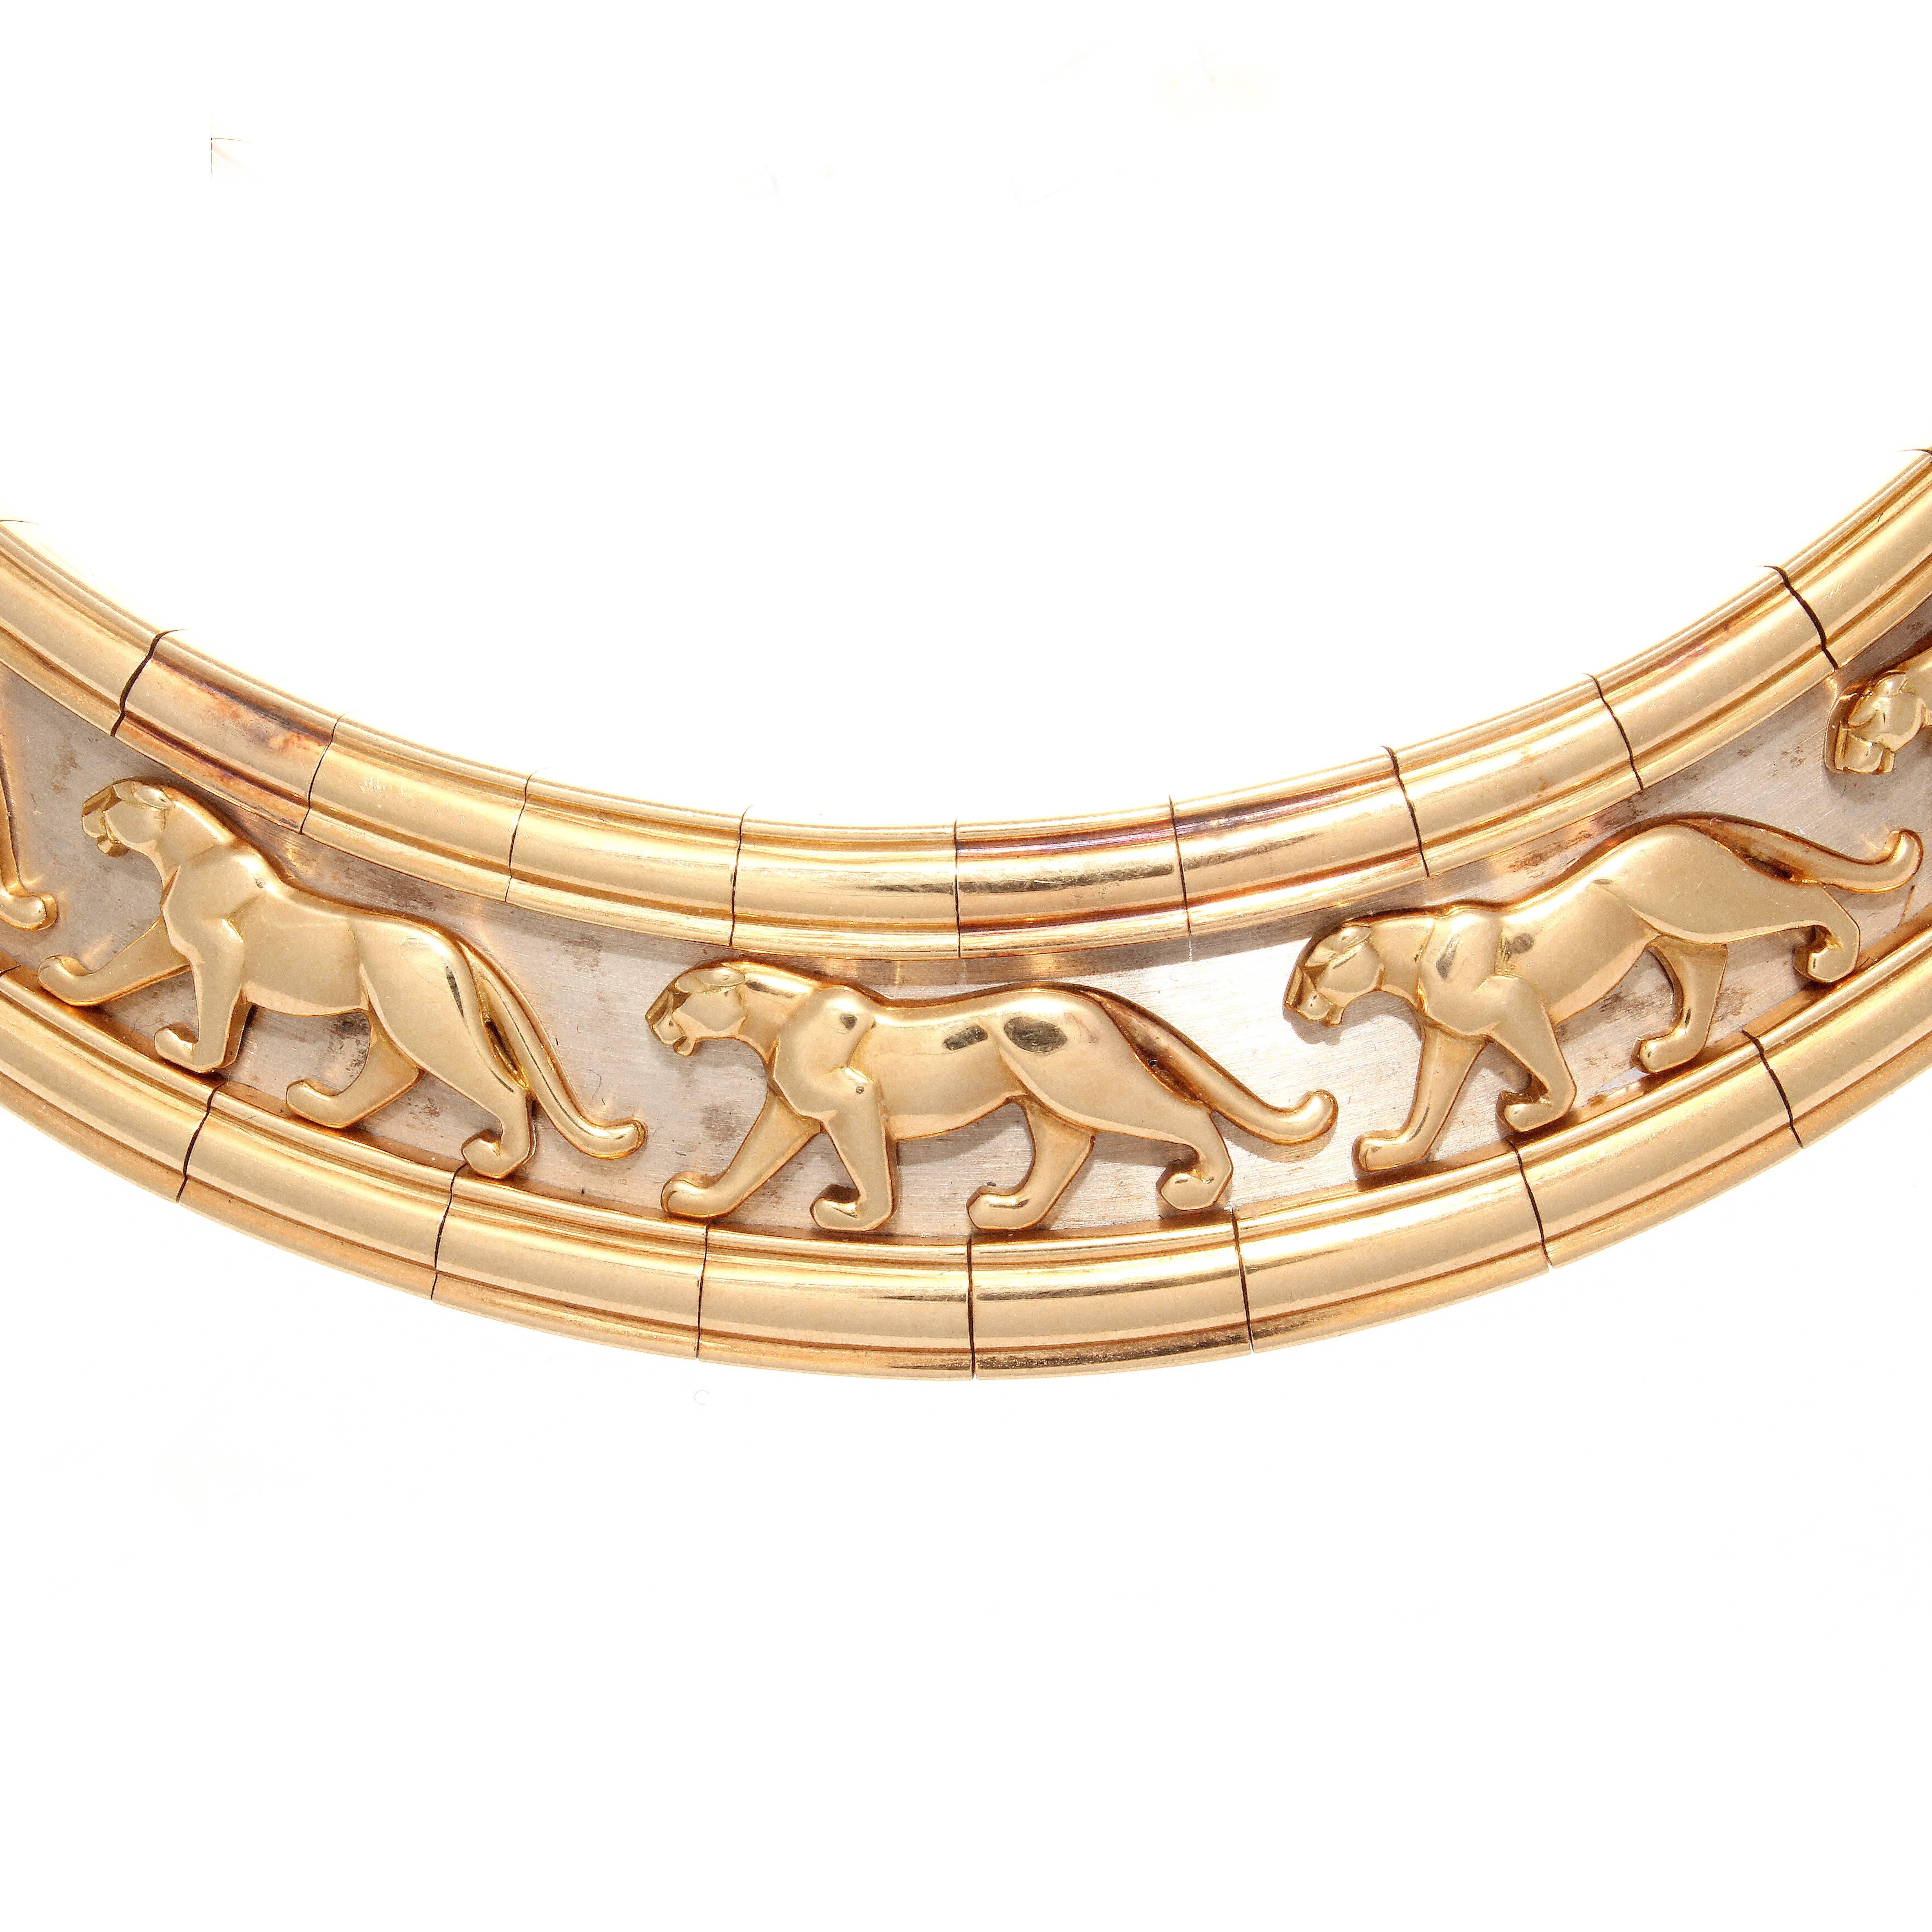 The Panthere collection from Cartier that captures femininity through the elegance of jewelry and the animal itself. Cartier was the first to explore this ideology through its designs. Featuring a pack of 17 panthers that wrap the entirety of the